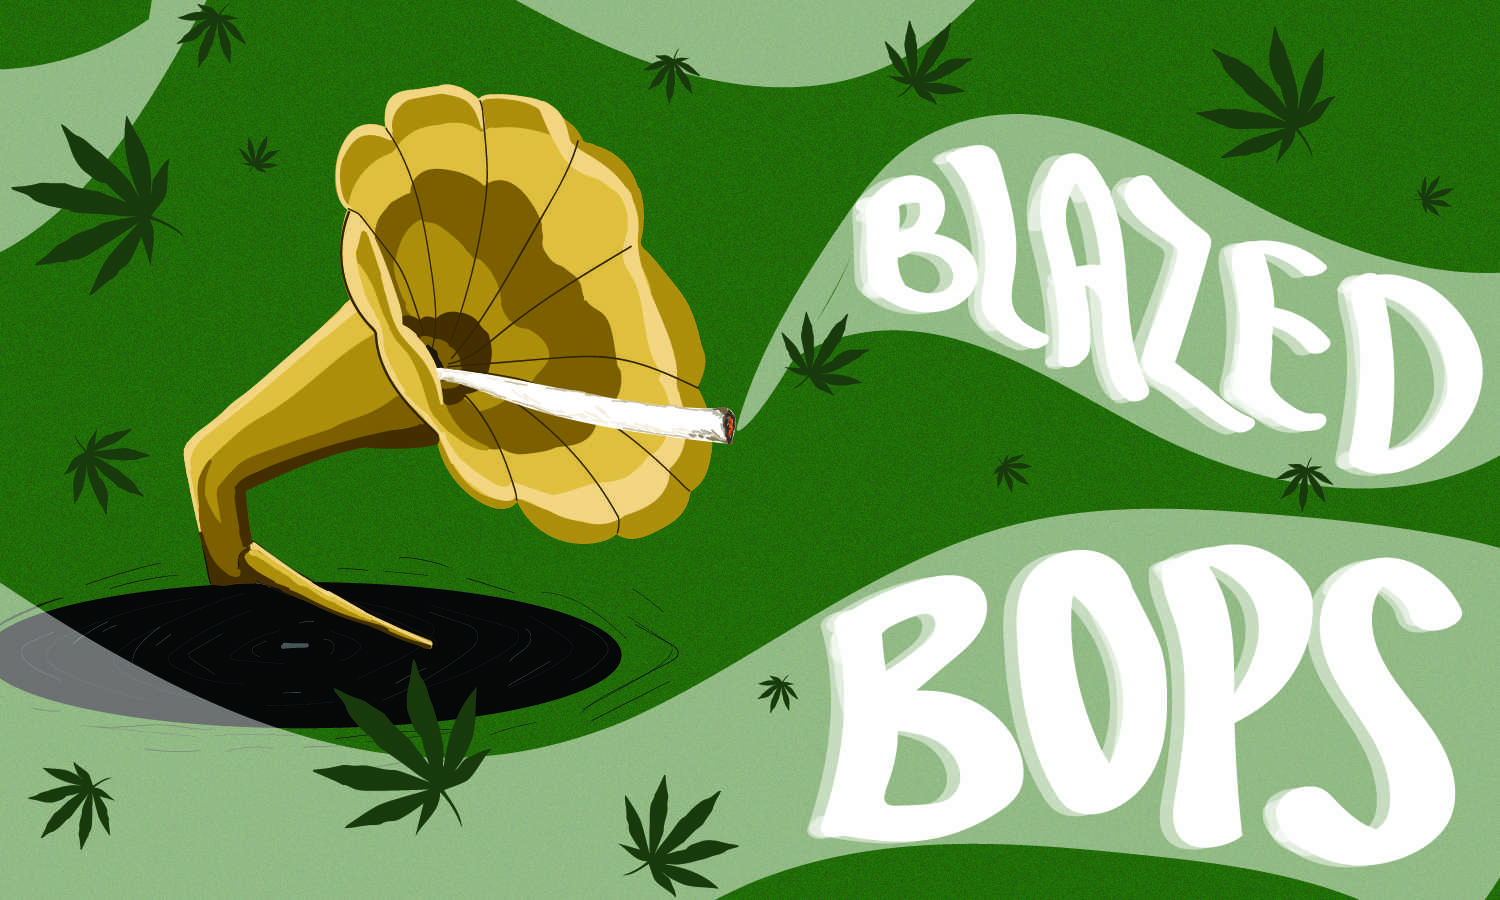 Graphic illustration of a gramophone smoking a joint with the words "Blazed Bops" coming out in the smoke